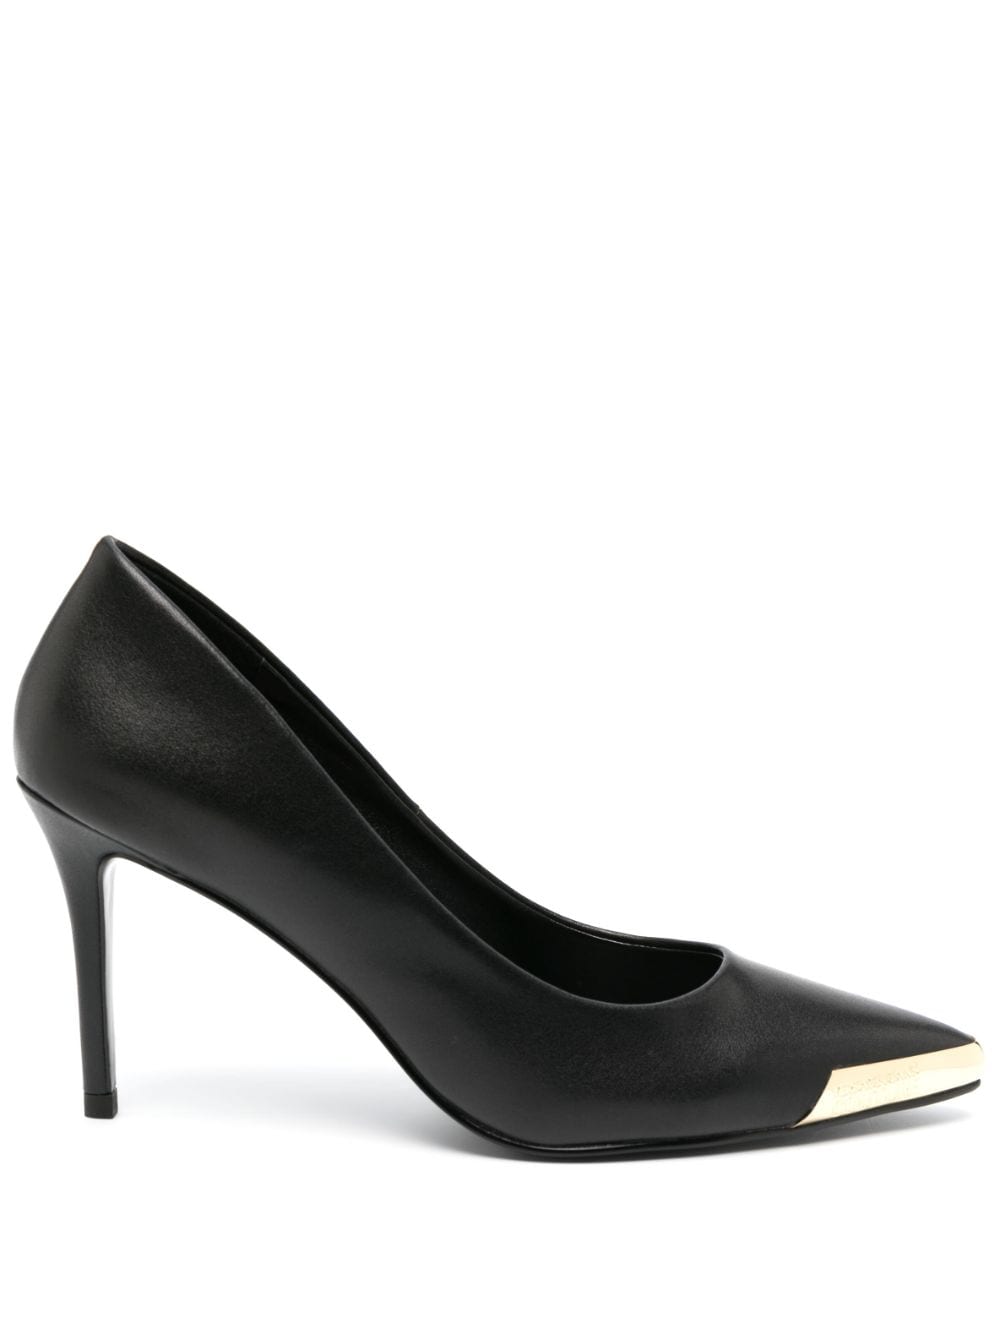 Versace Jeans Couture metal-toe 85mm leather pumps - Black von Versace Jeans Couture